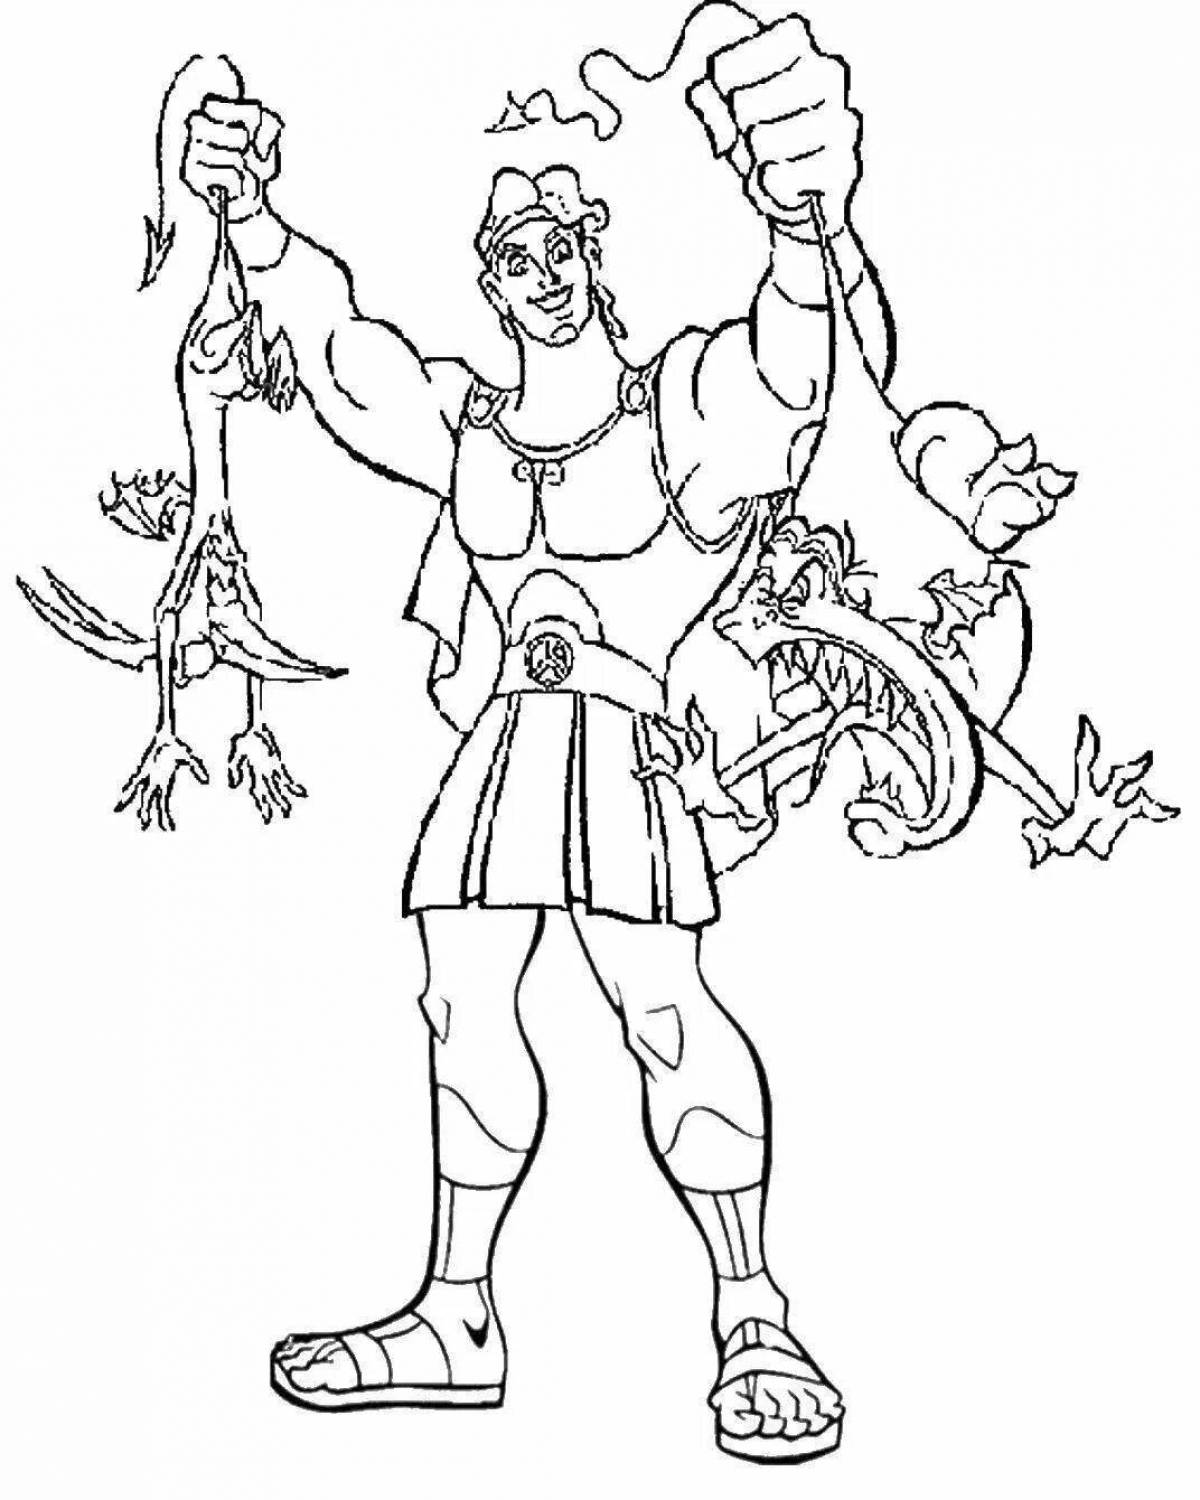 Charming coloring book from ancient Greek myths